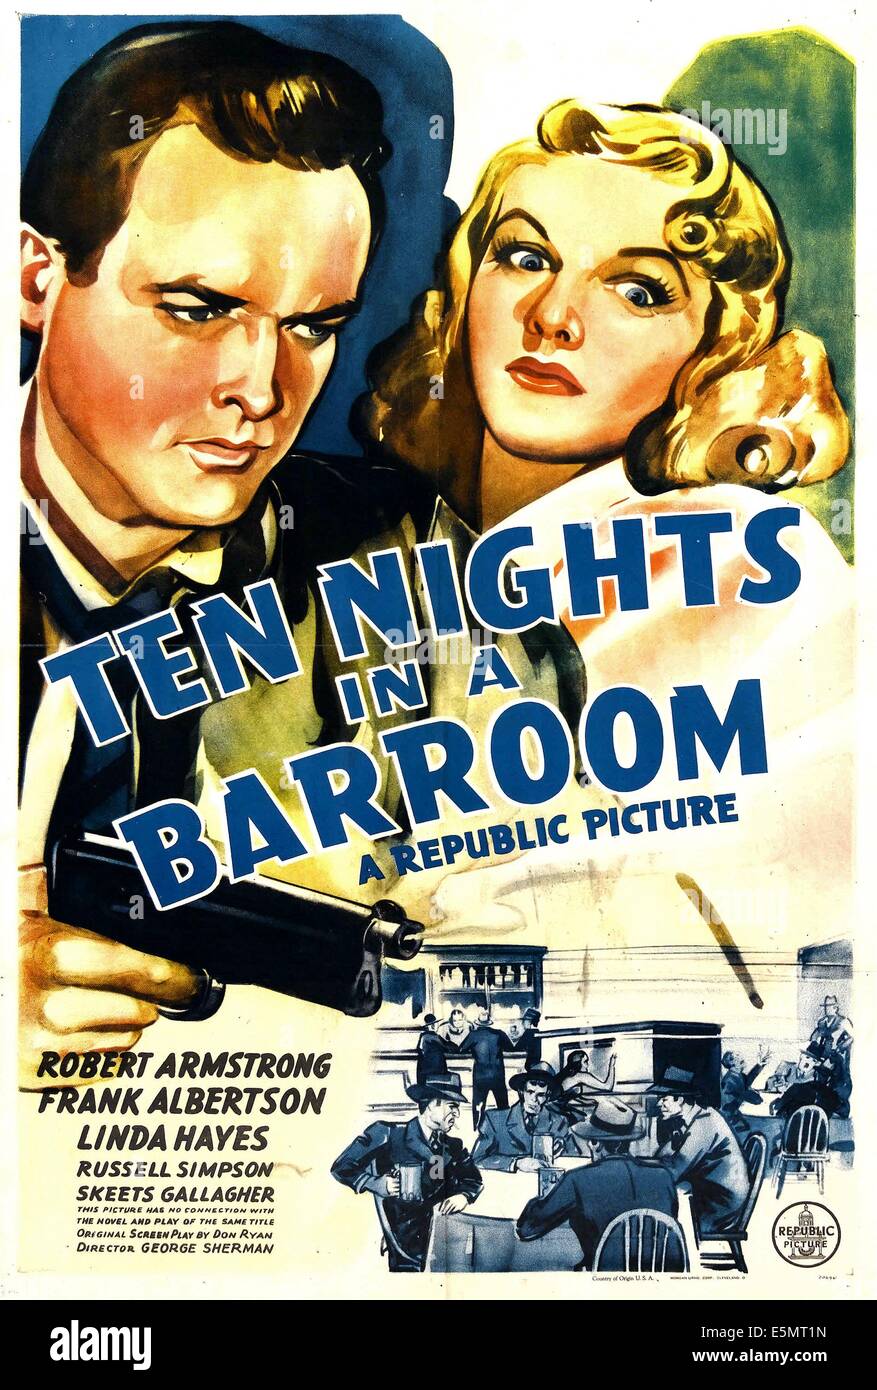 TEN NIGHTS IN A BARROOM, from left: Robert Armstrong, Linda Hayes, 1931. Stock Photo